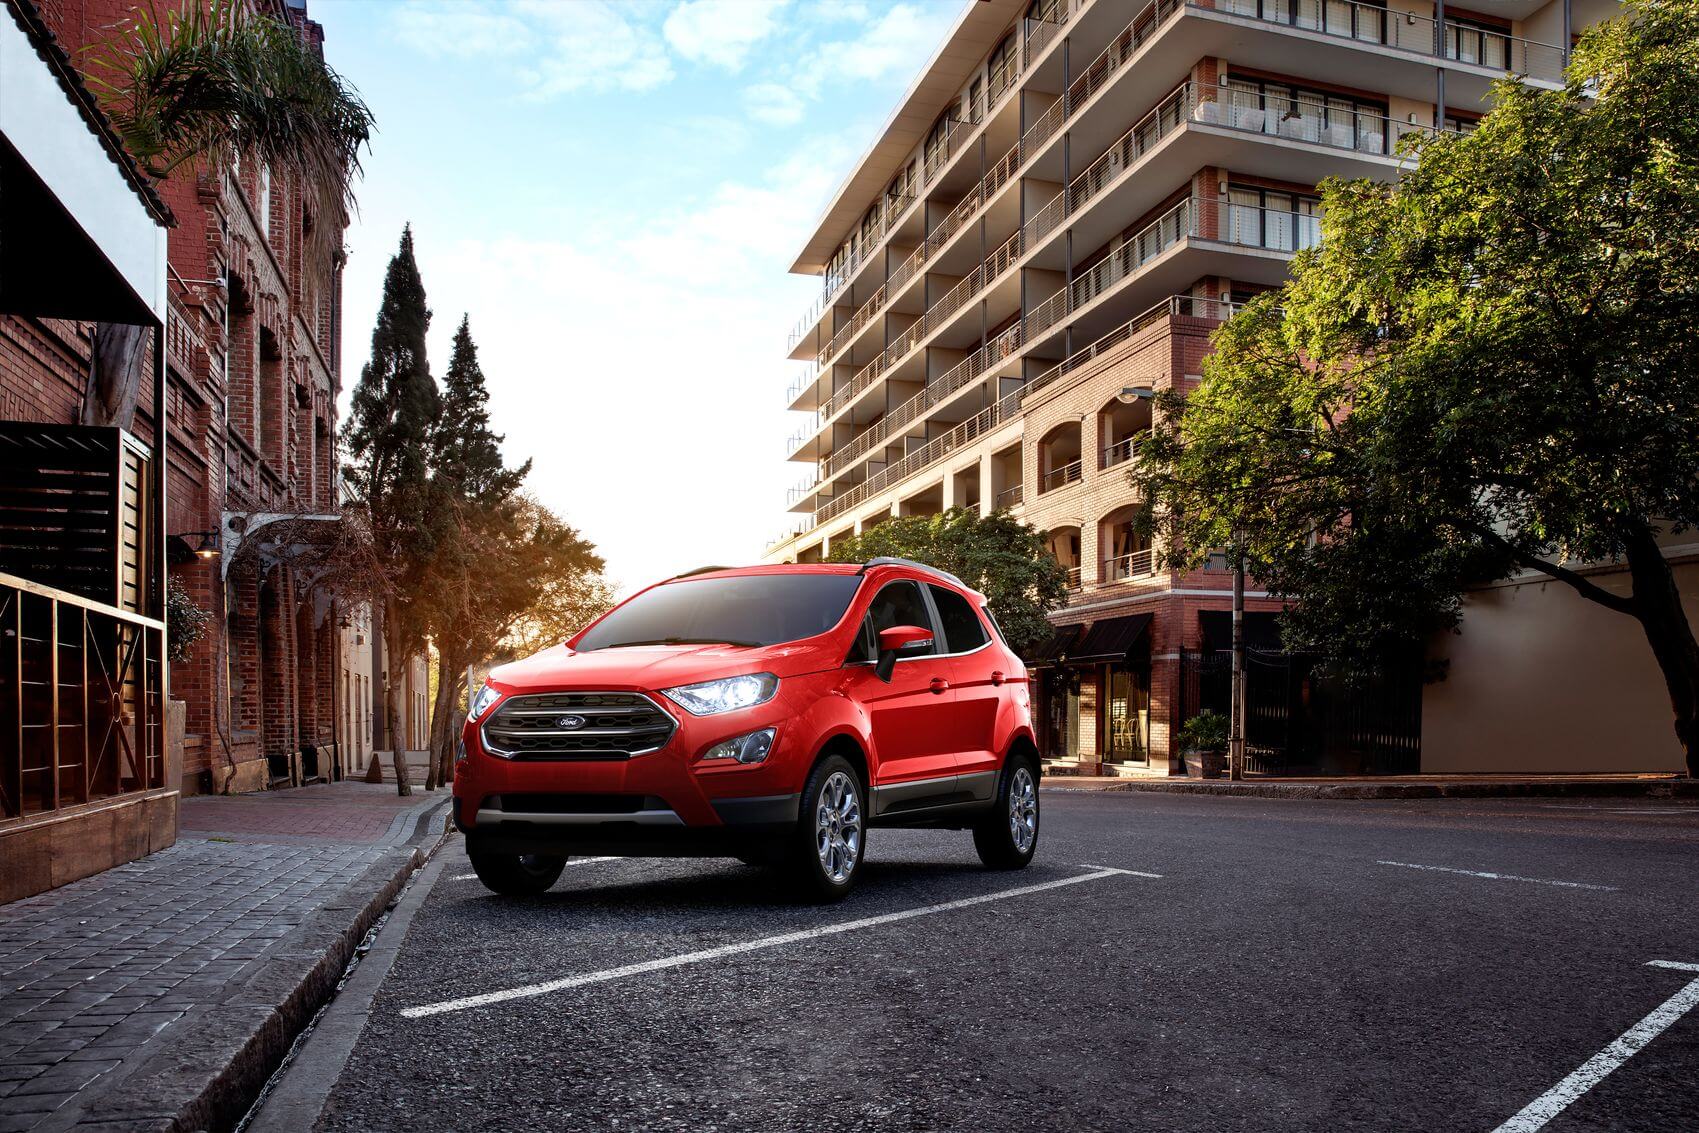 The EcoSport is great for city and highway alike!